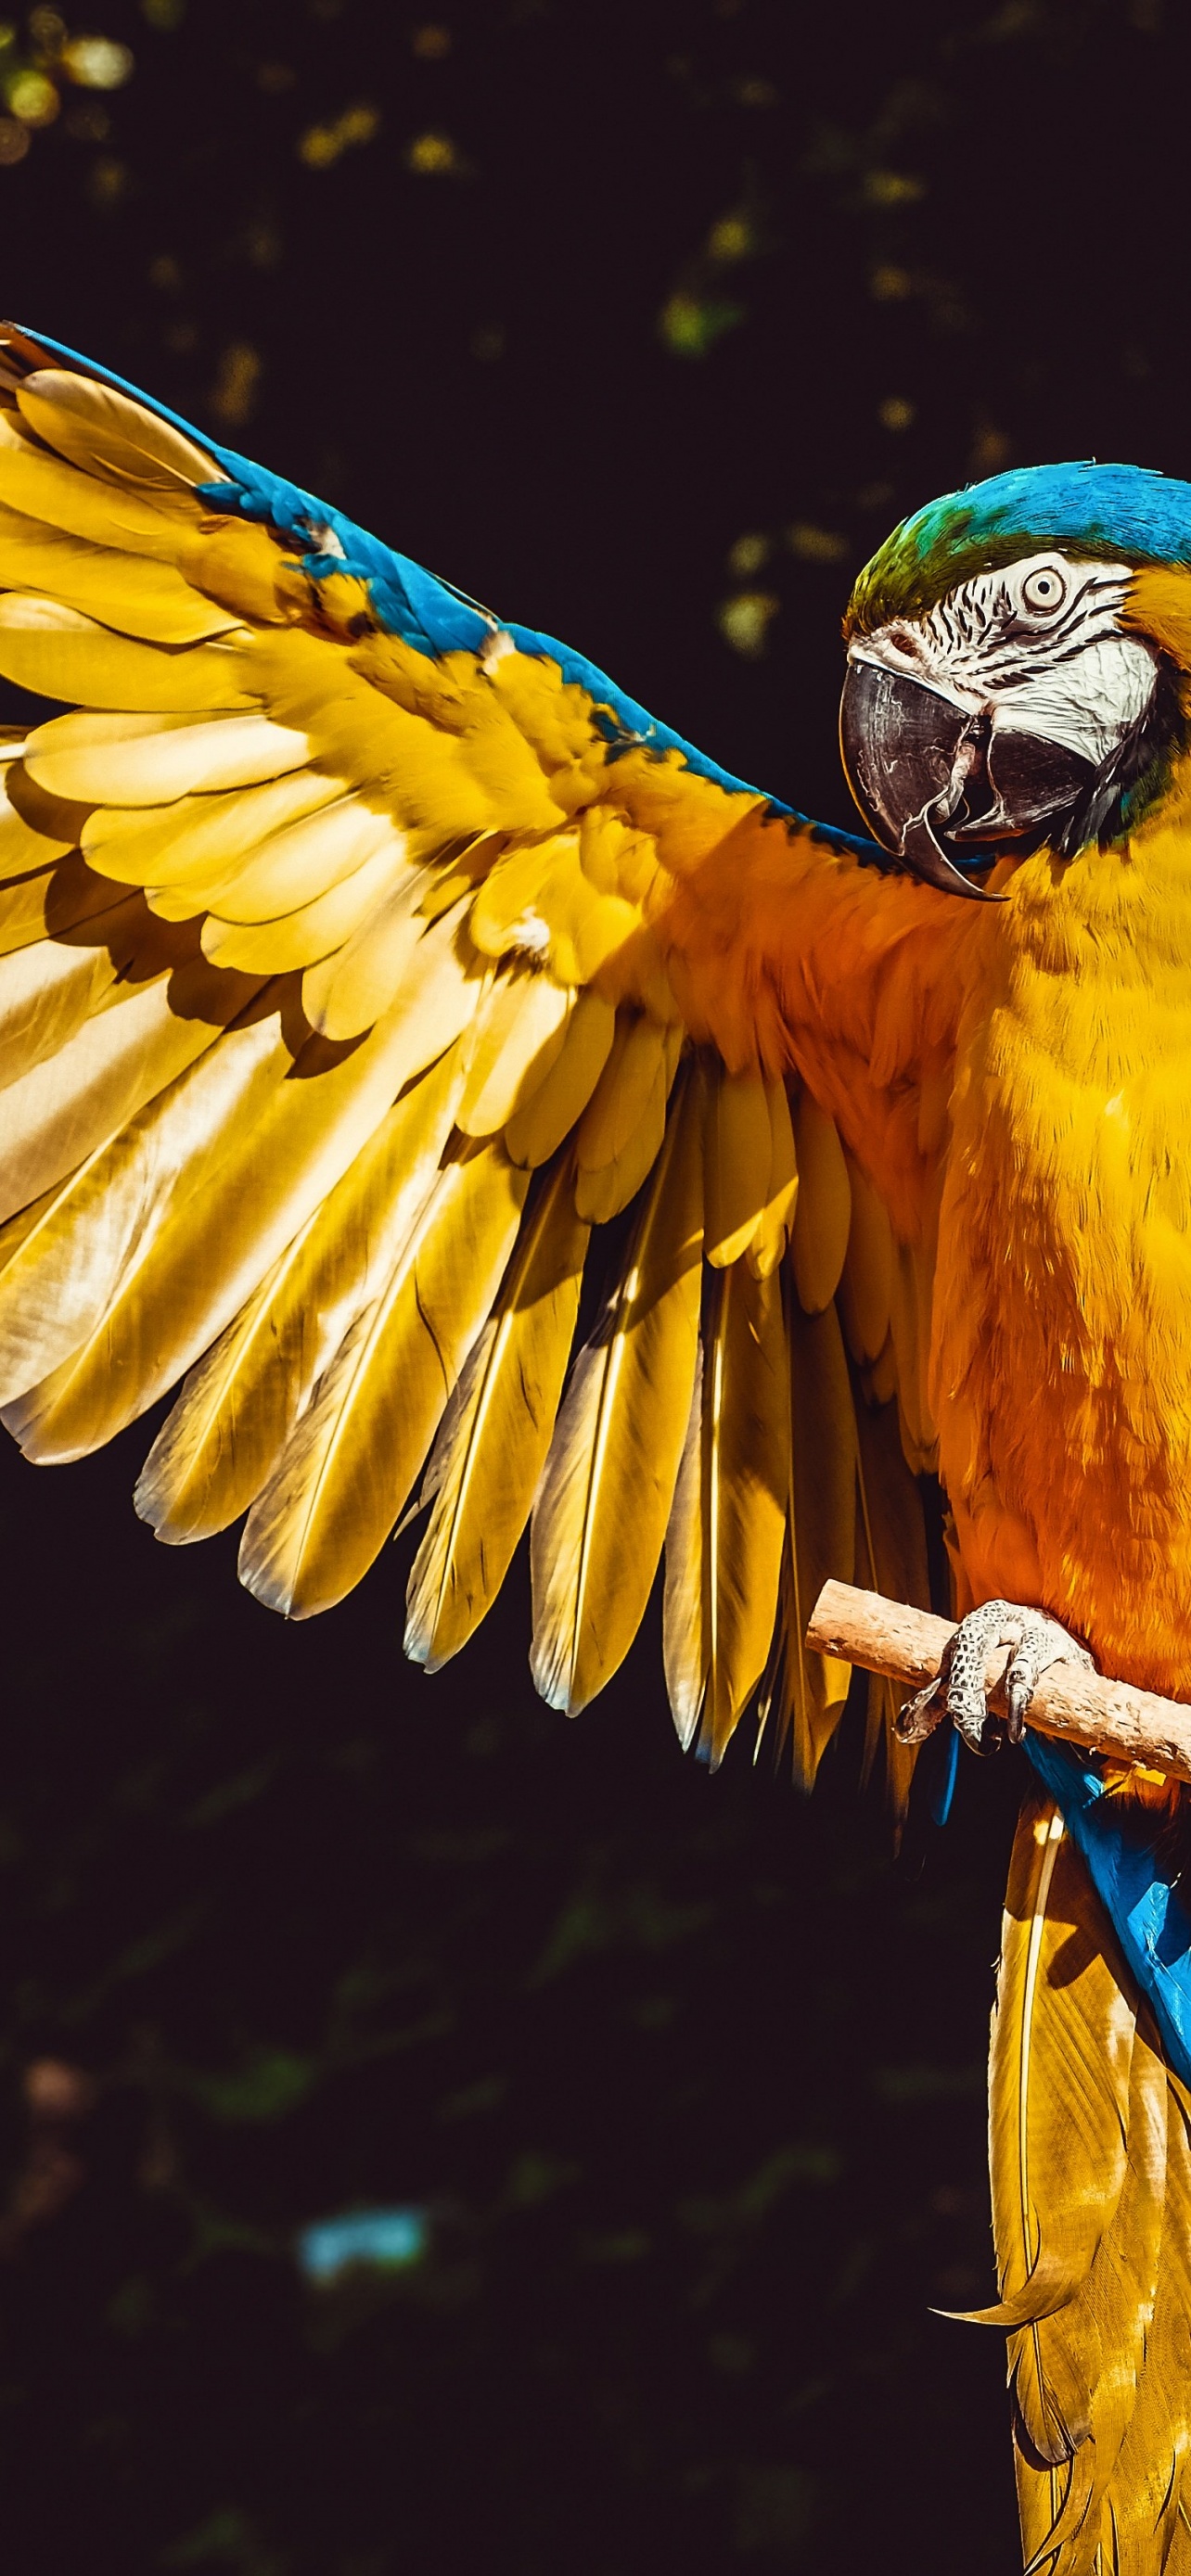 Yellow Macaw Wallpaper 4K, Bird, Colorful, Parrot, Black background, 5K